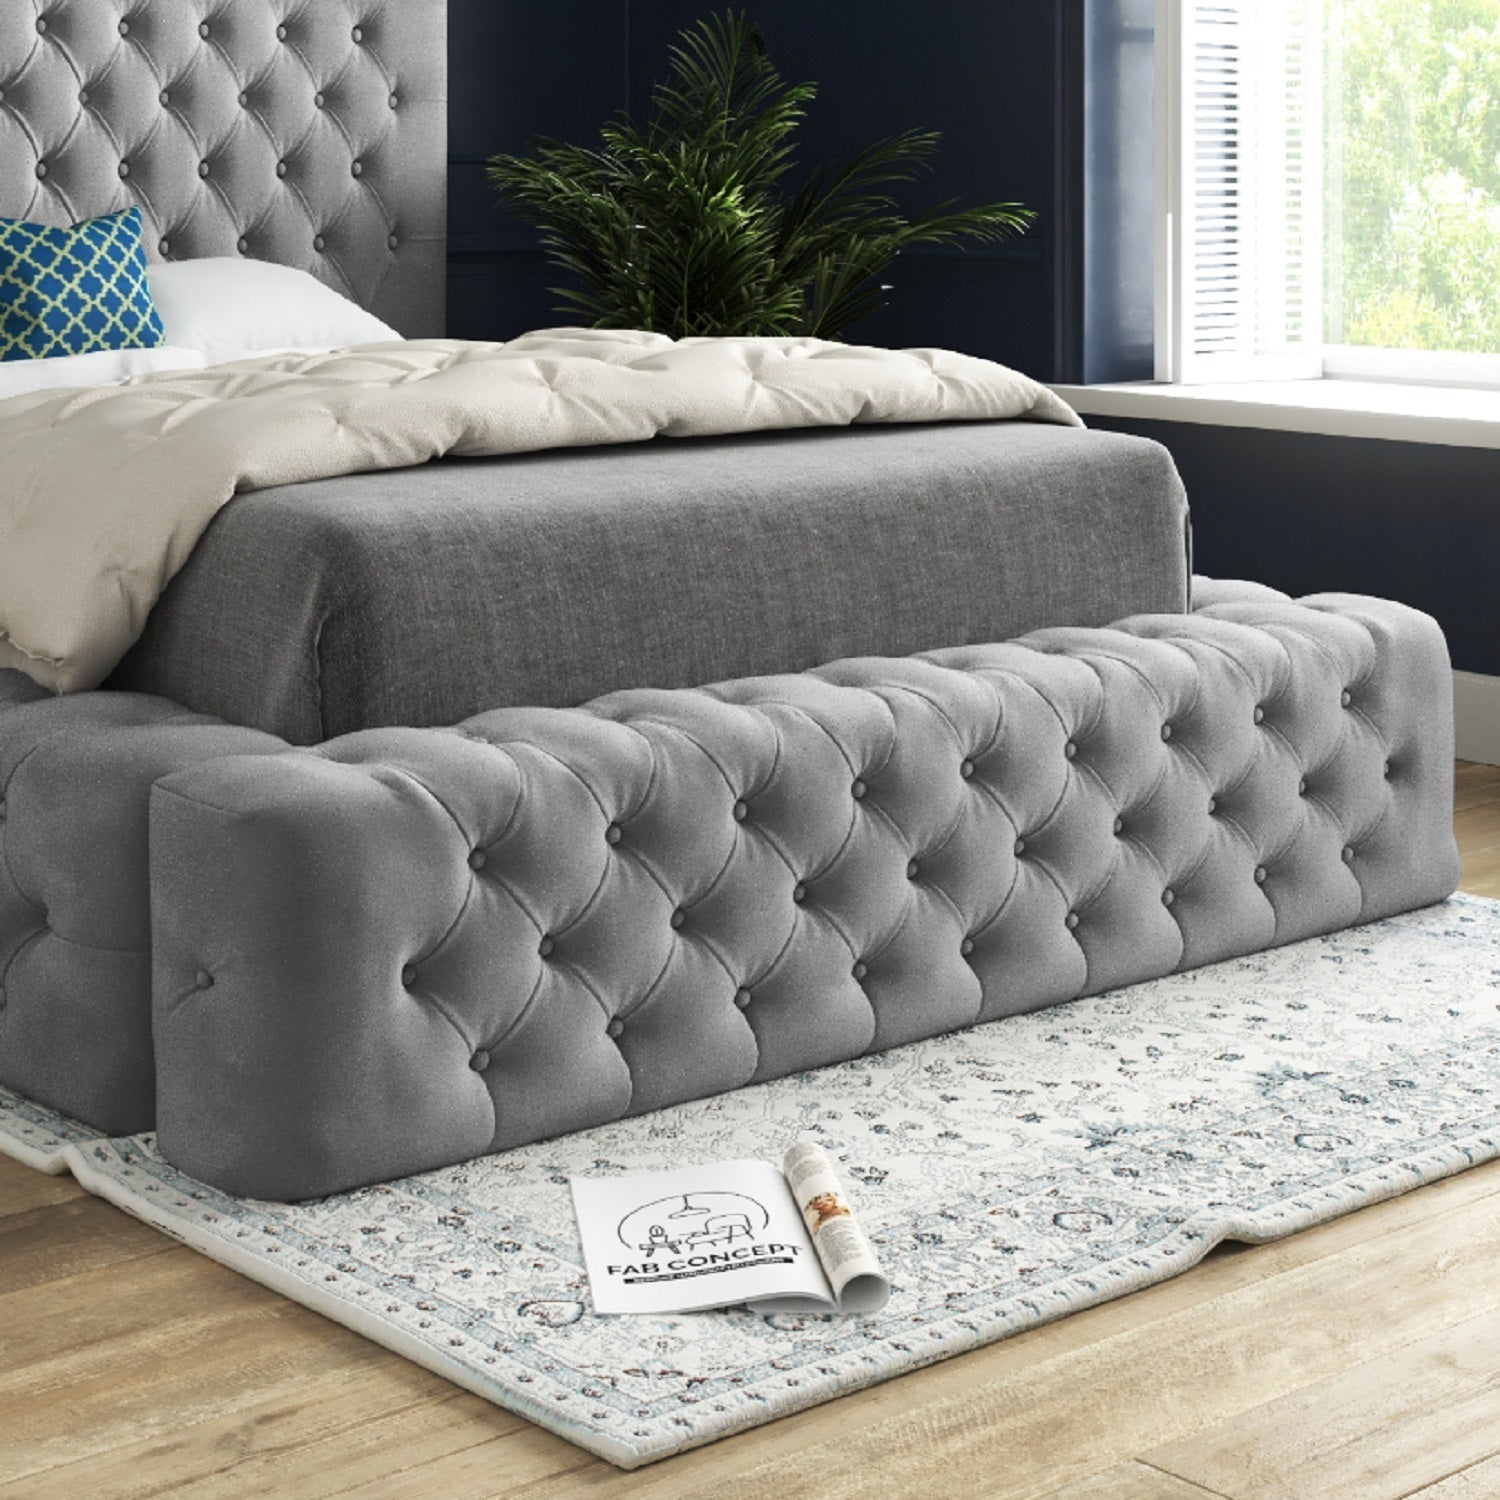 Donlon Pleated Upholstery Bed Frame